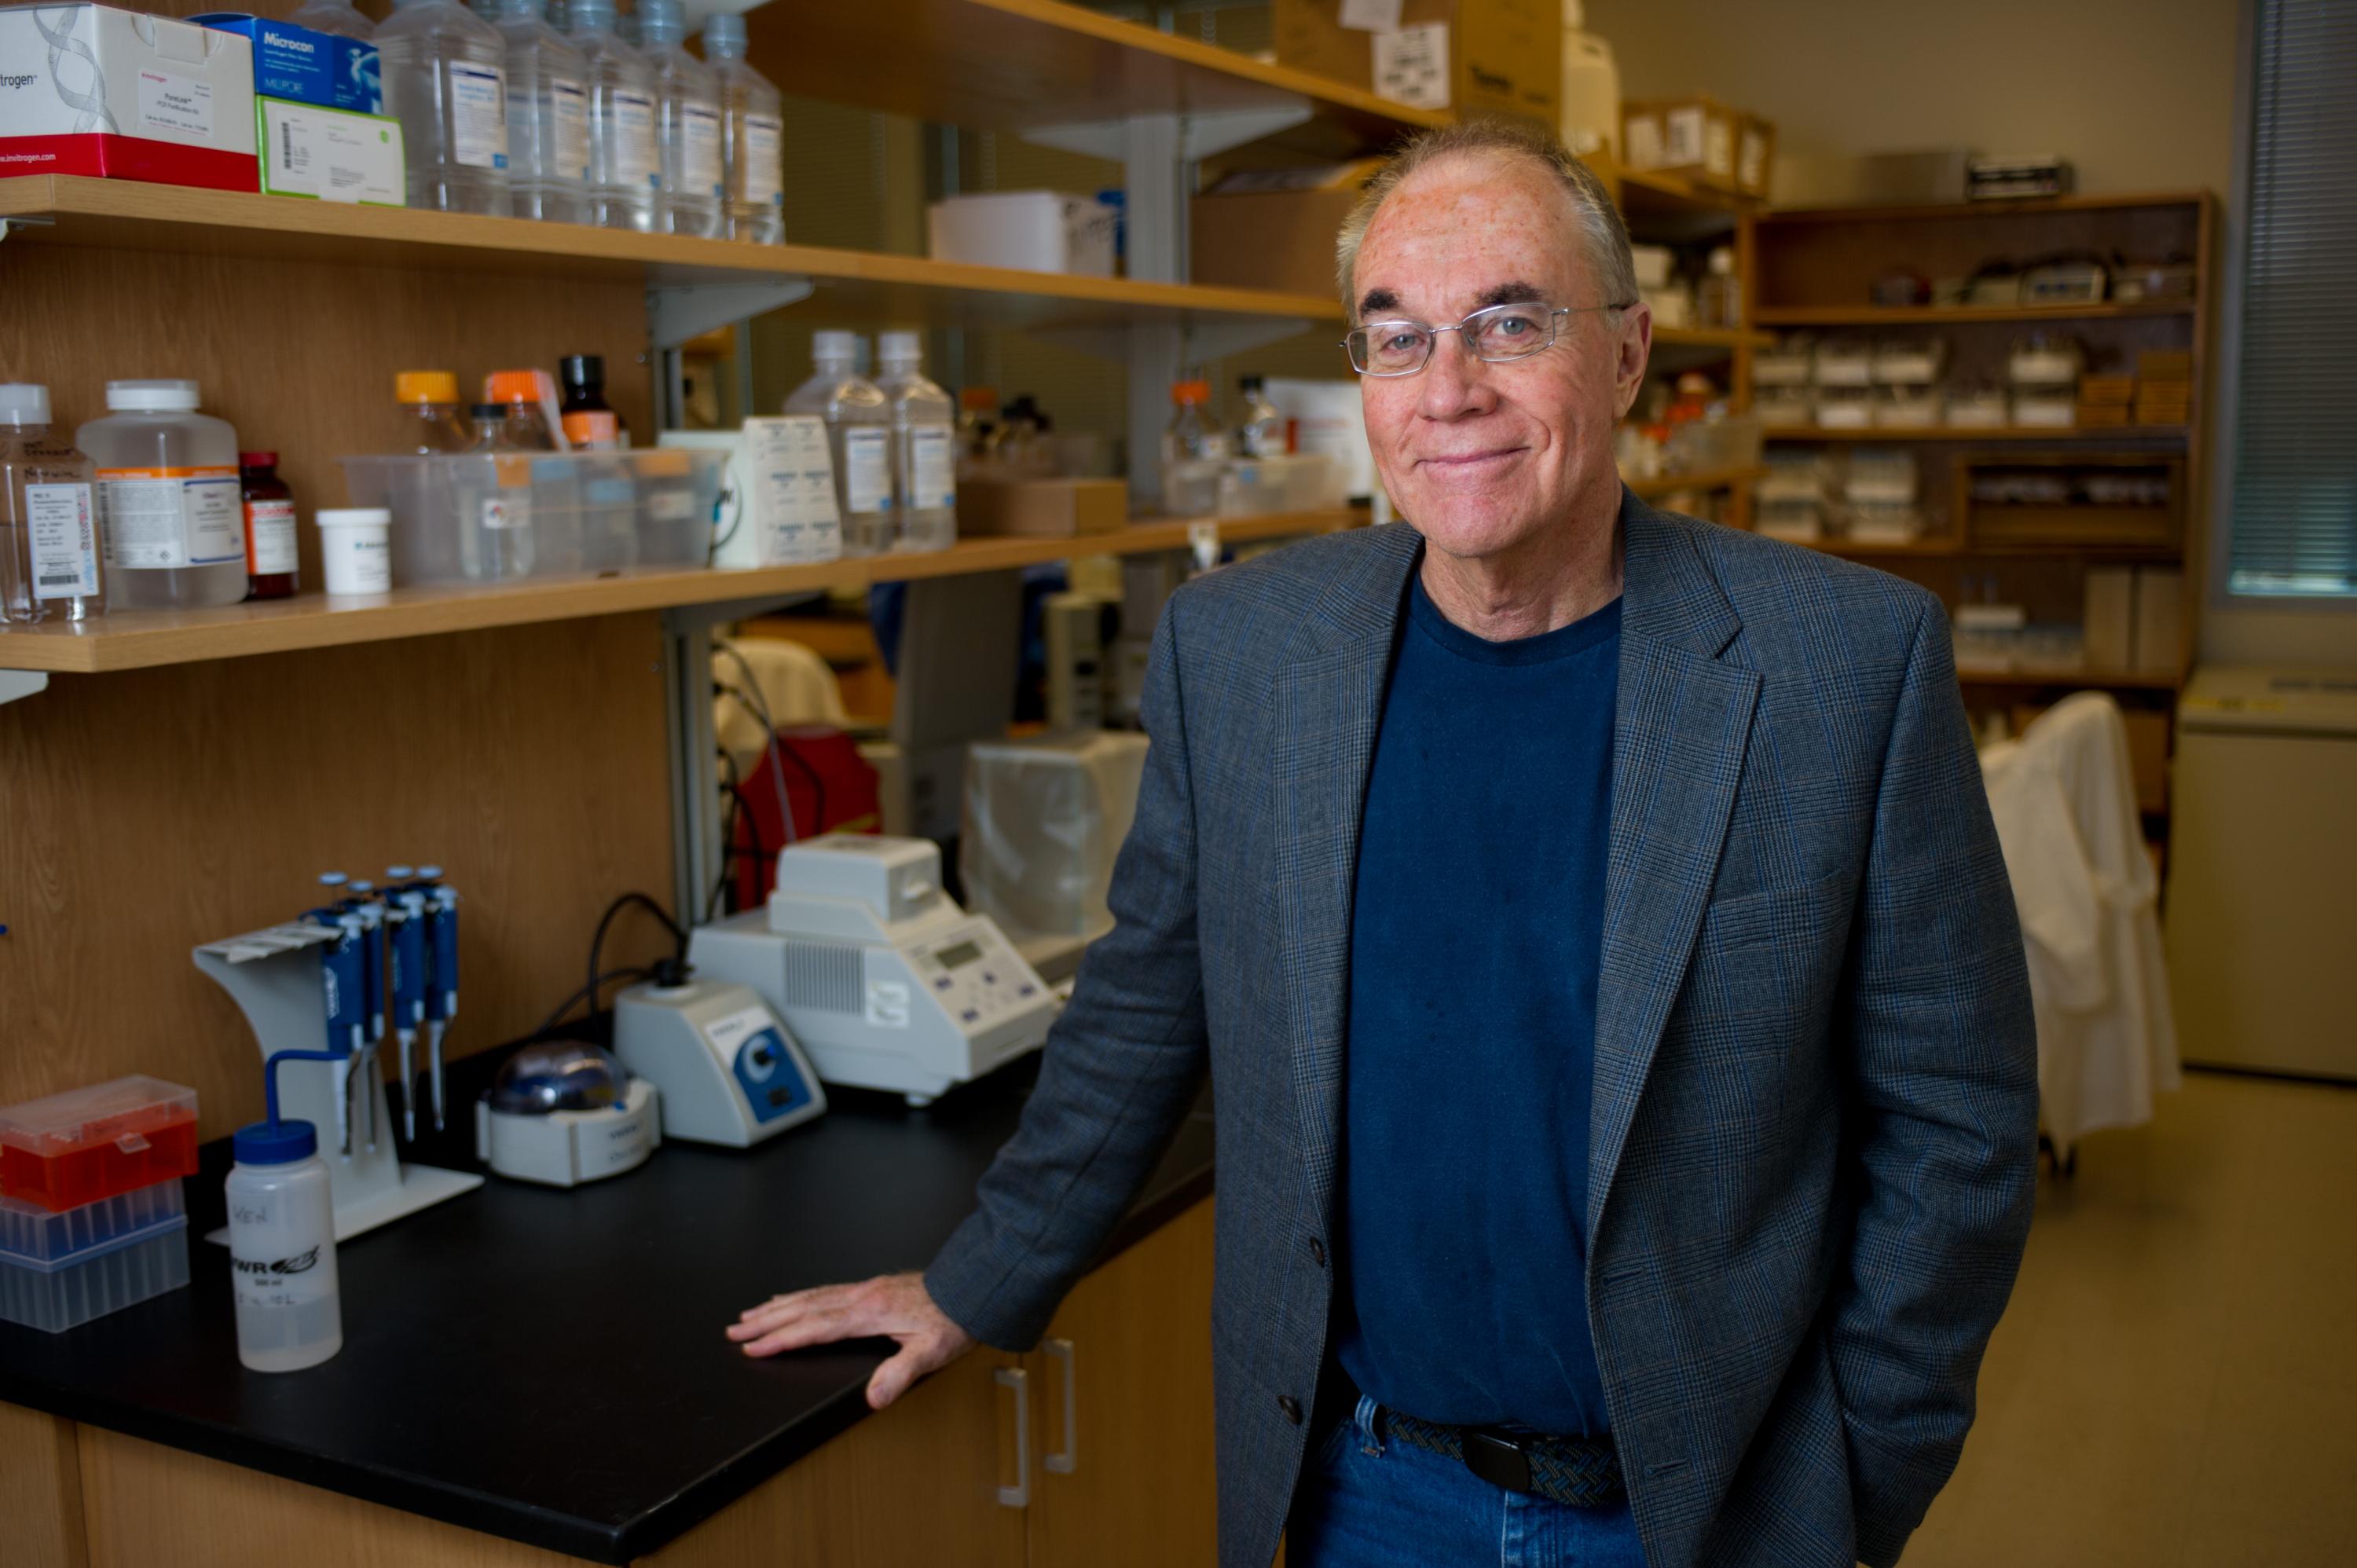 The Prevent Cancer Foundation has made a significant grant award to Georgia Tech to advance research on detecting ovarian cancer. The work is led by John McDonald, a professor in the School of Biological Sciences. (Credit: Rob Felt, Georgia Tech)